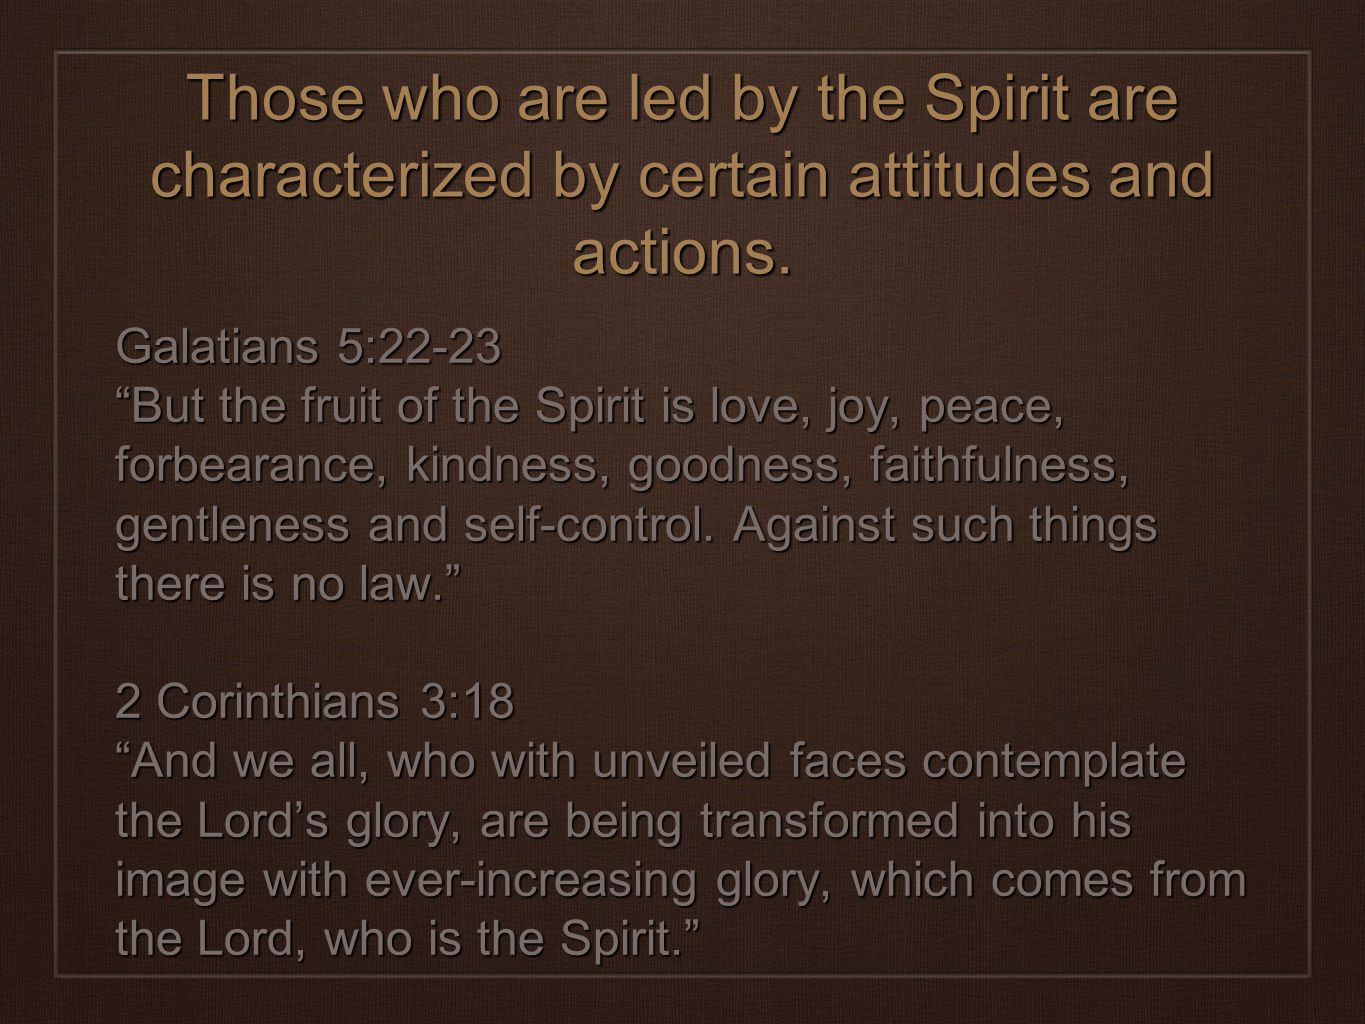 Those who are led by the Spirit are characterized by certain attitudes and actions.